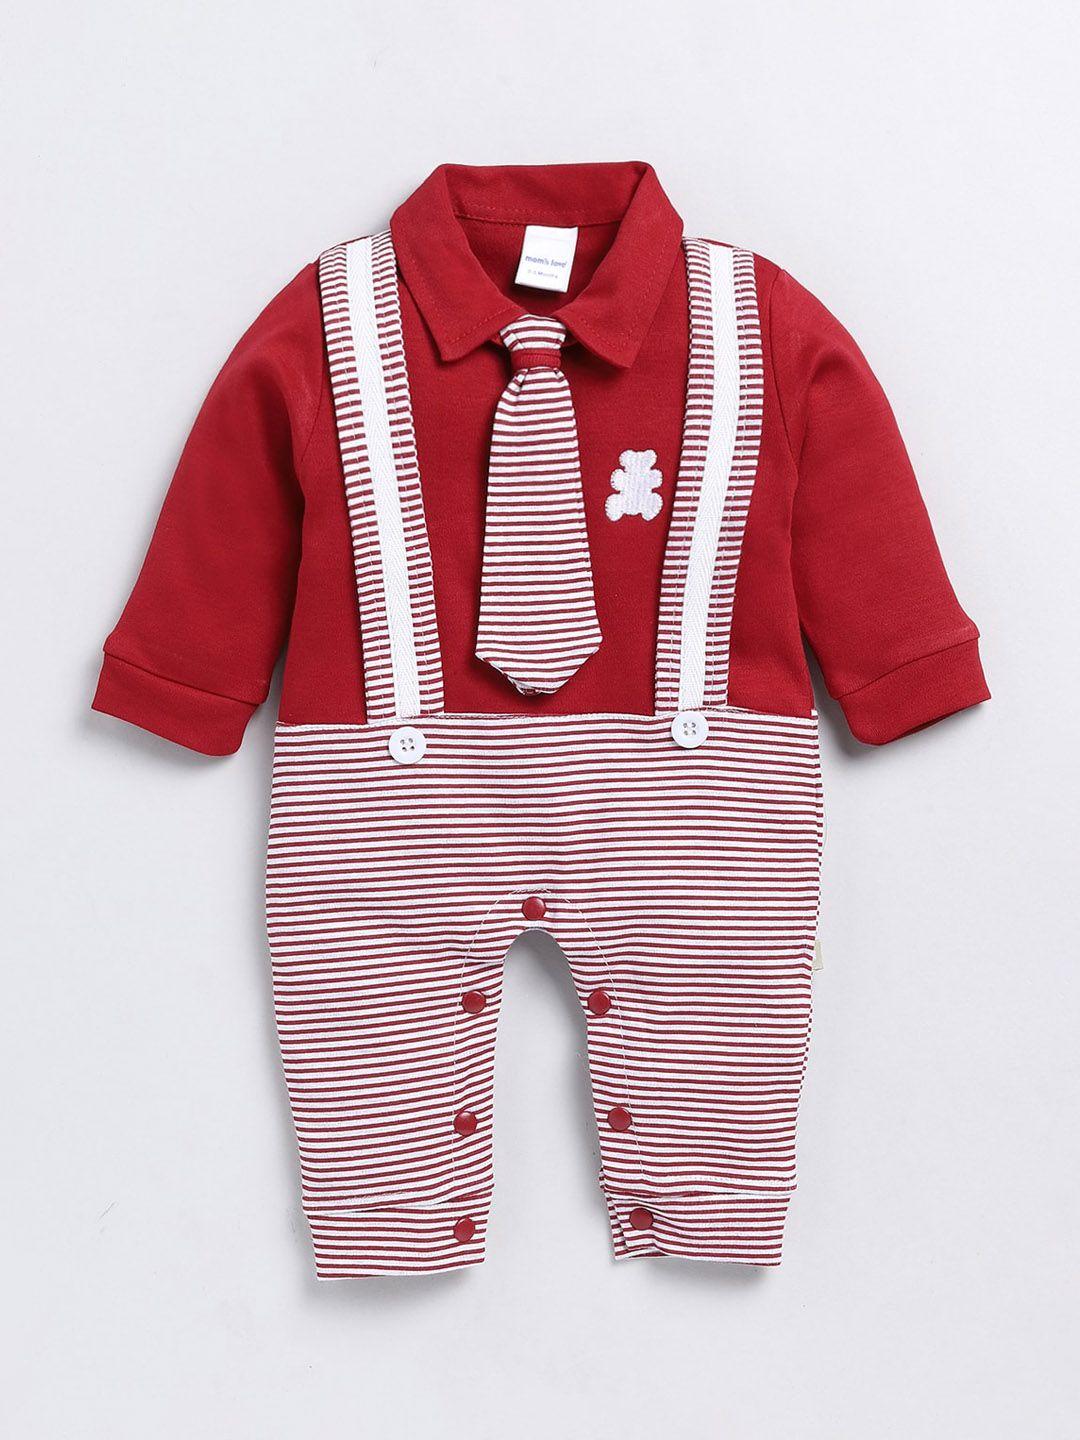 moms-love-infant-boys-striped-pure-cotton-rompers